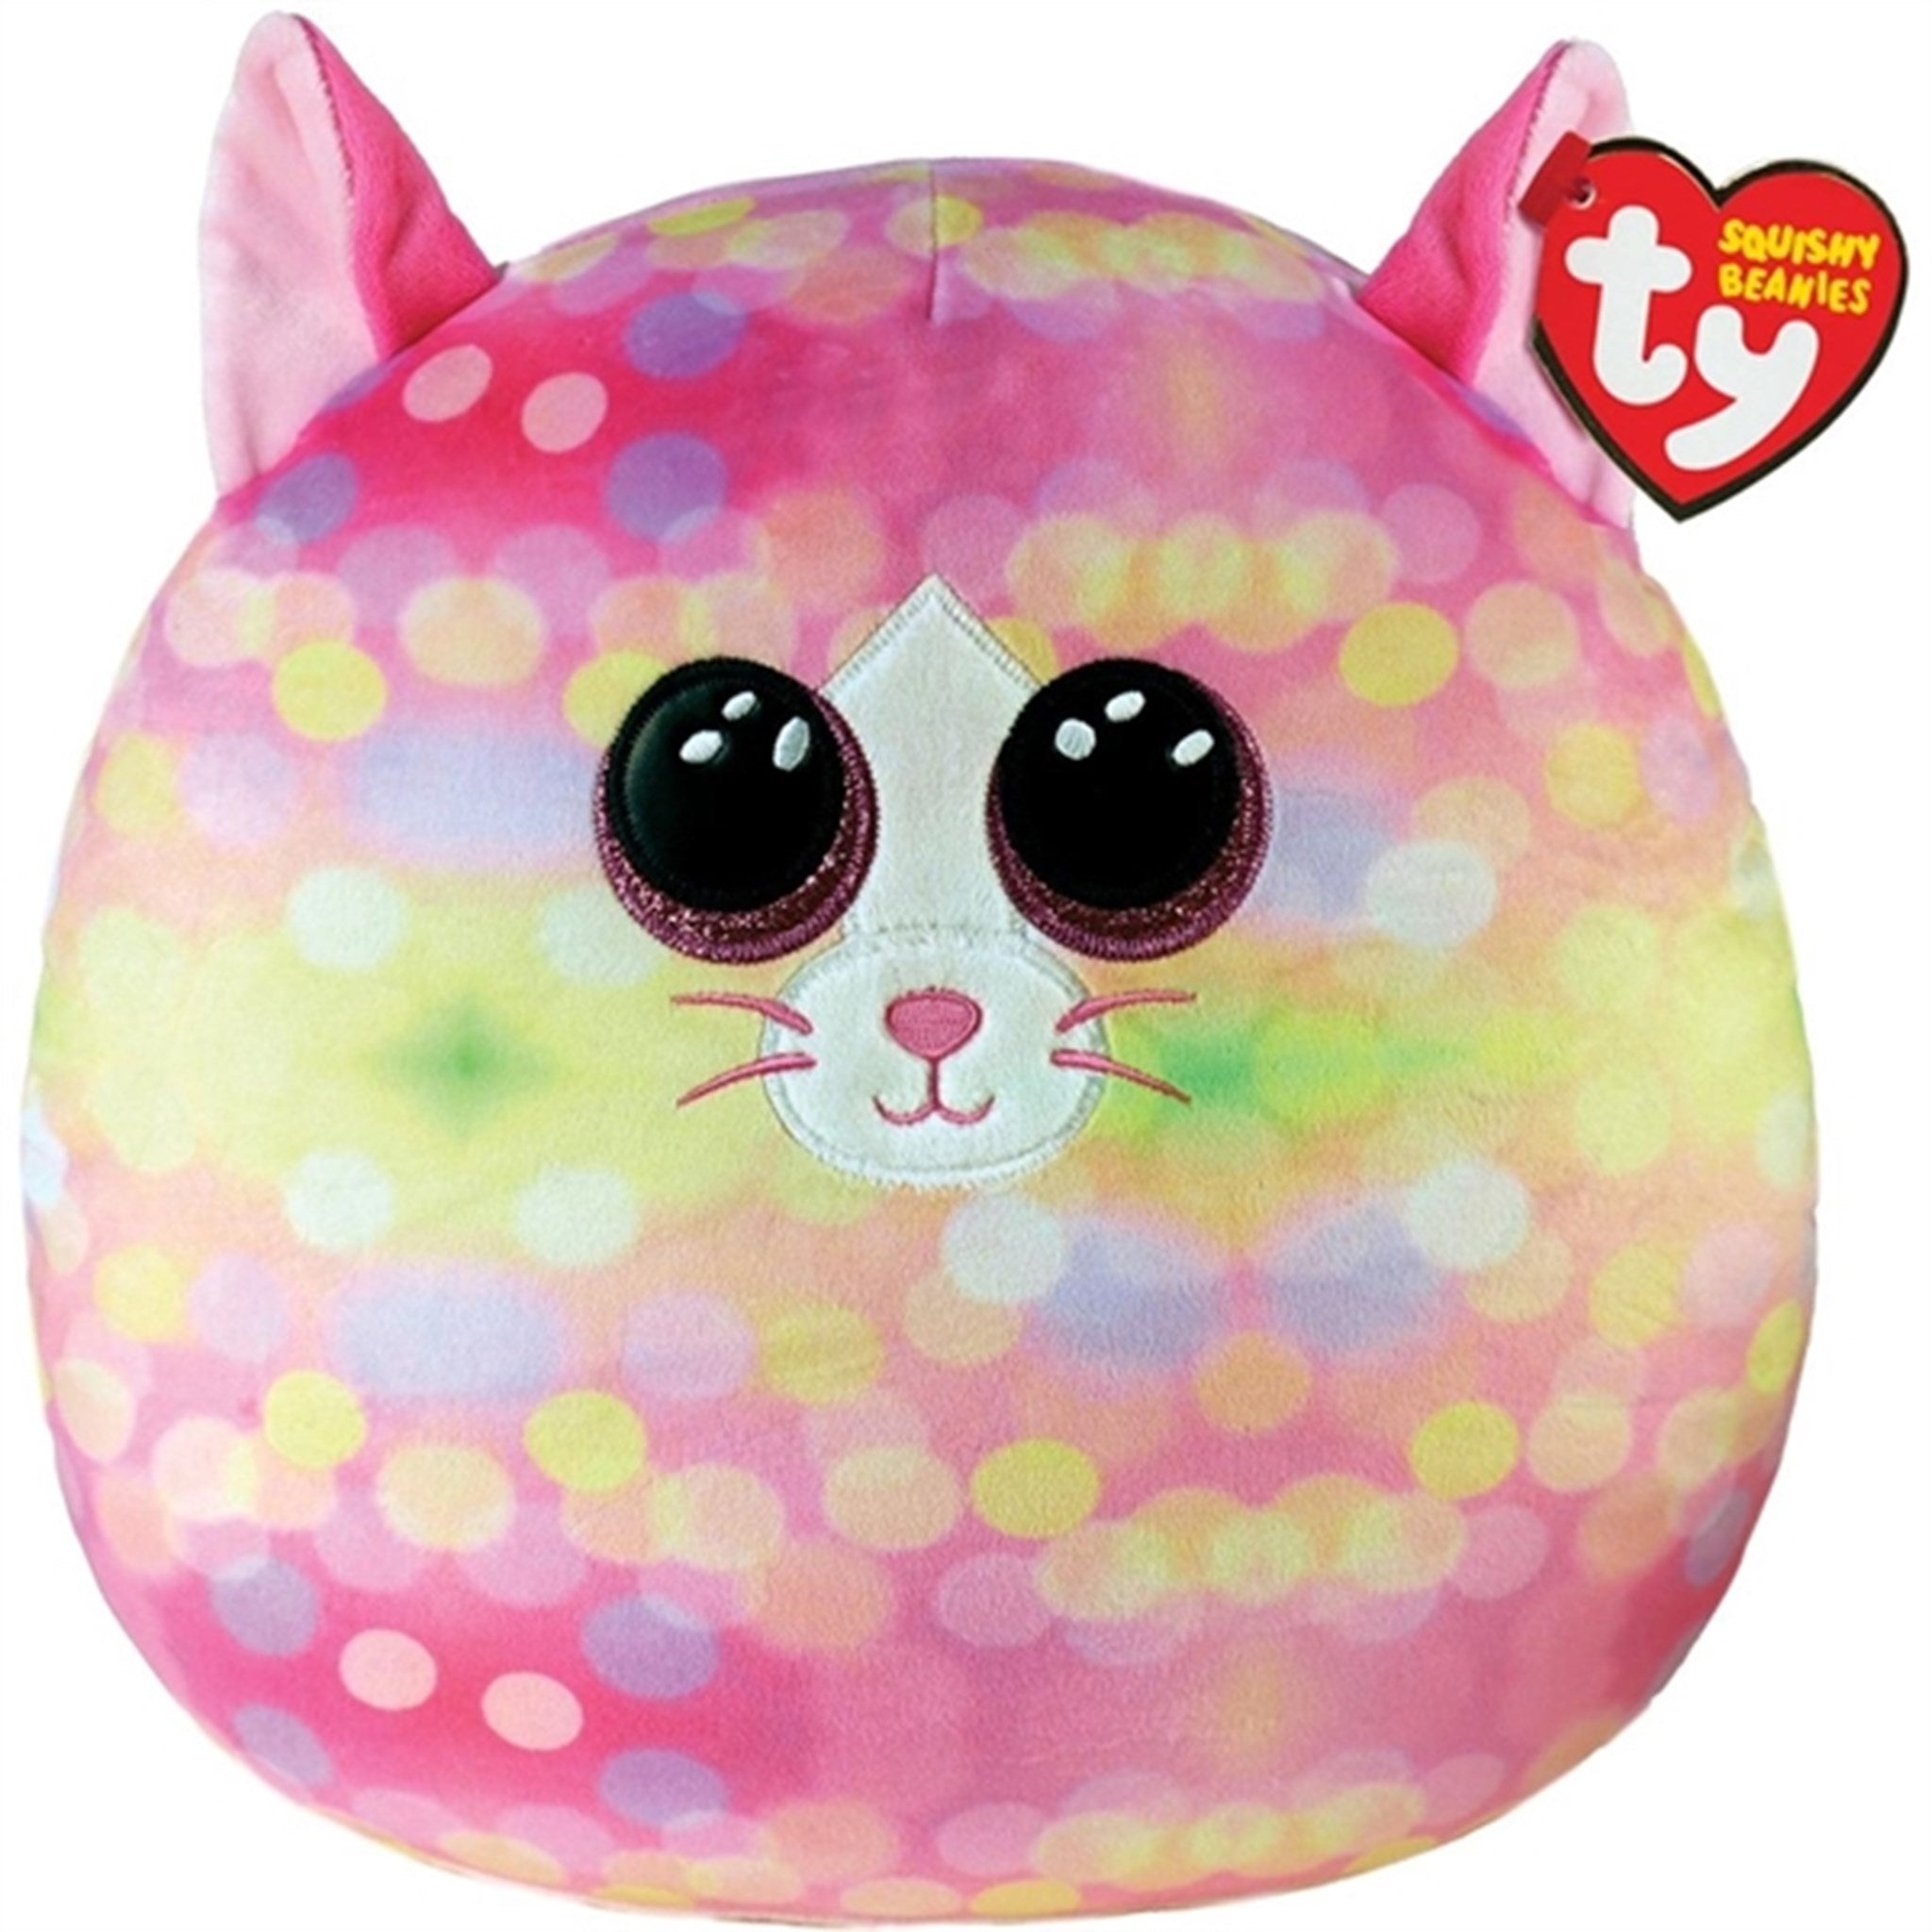 TY Squishy Beanies Sonny - Pink Pattern Cat Squish 35cm